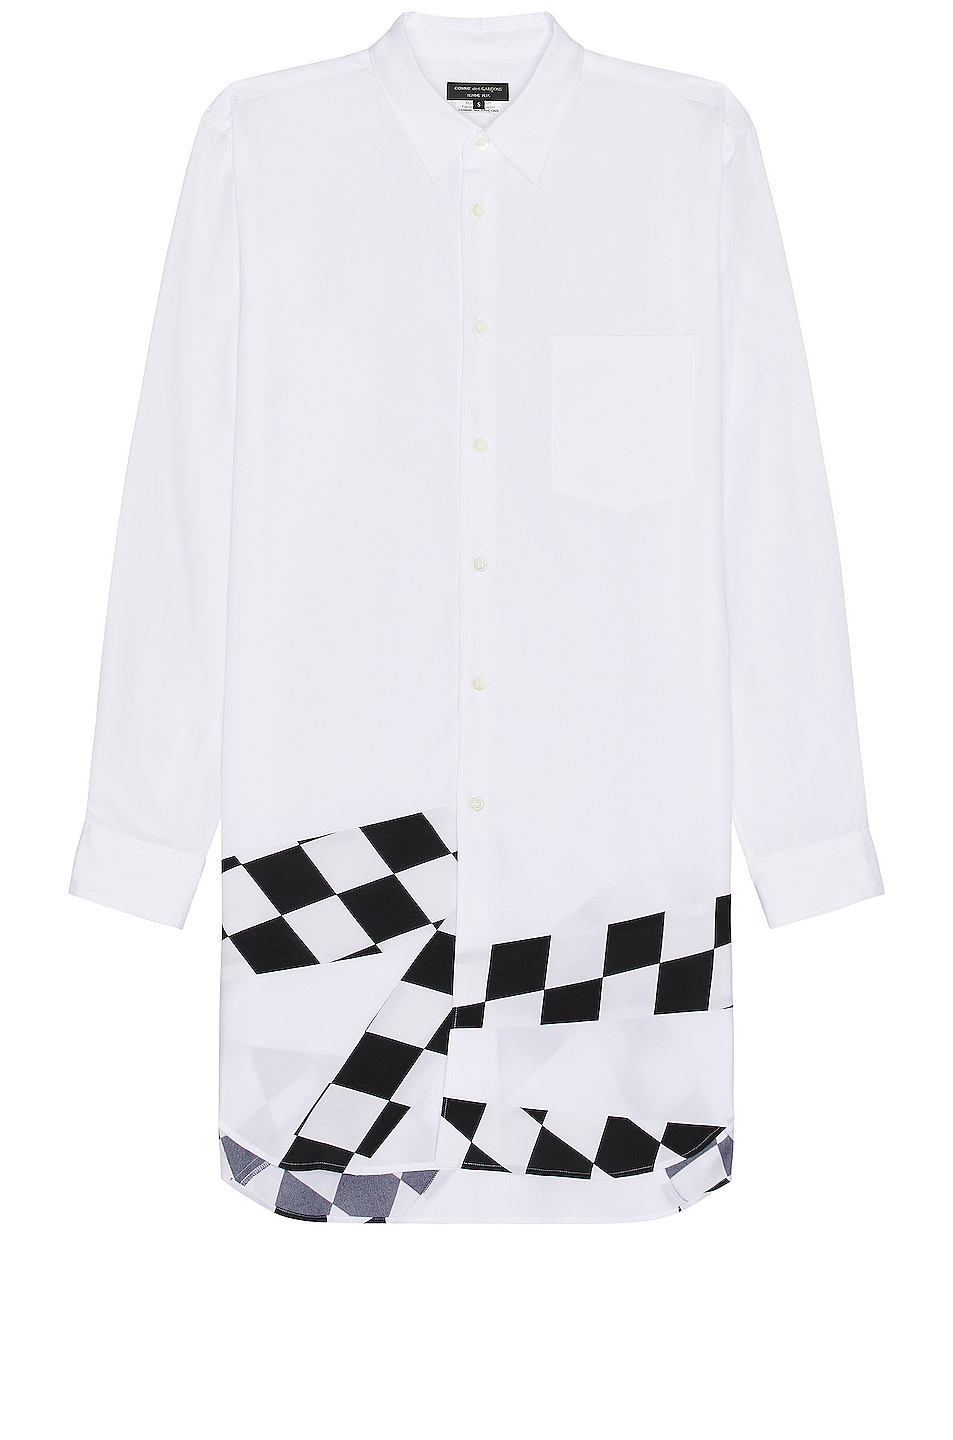 Image 1 of COMME des GARCONS Homme Plus Shirt in White & Black